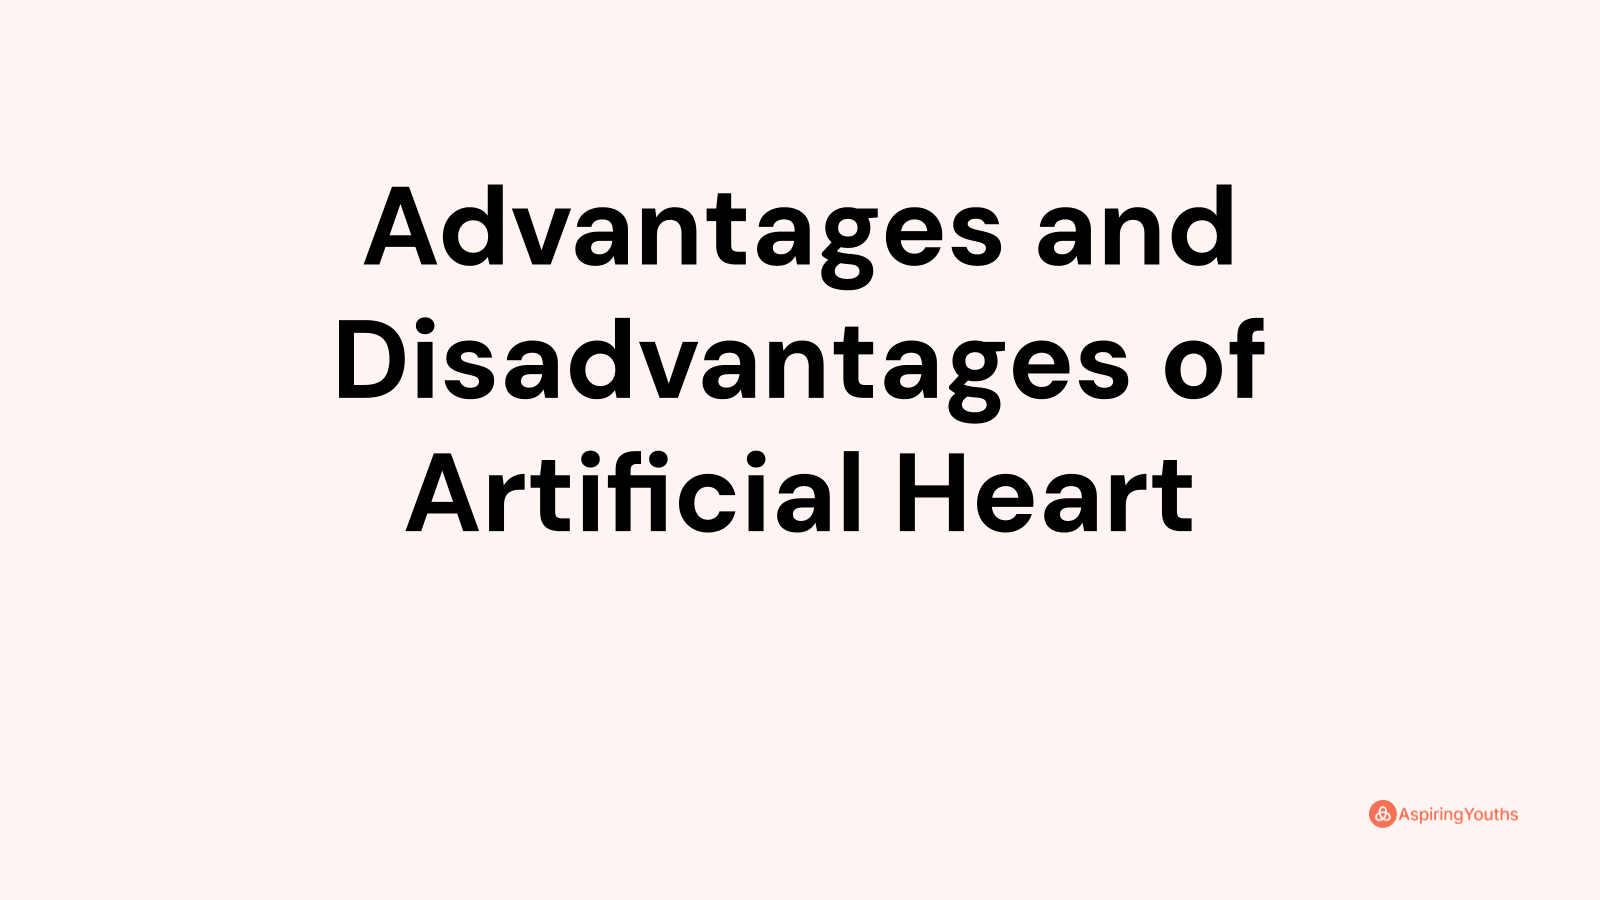 Advantages and disadvantages of Artificial Heart